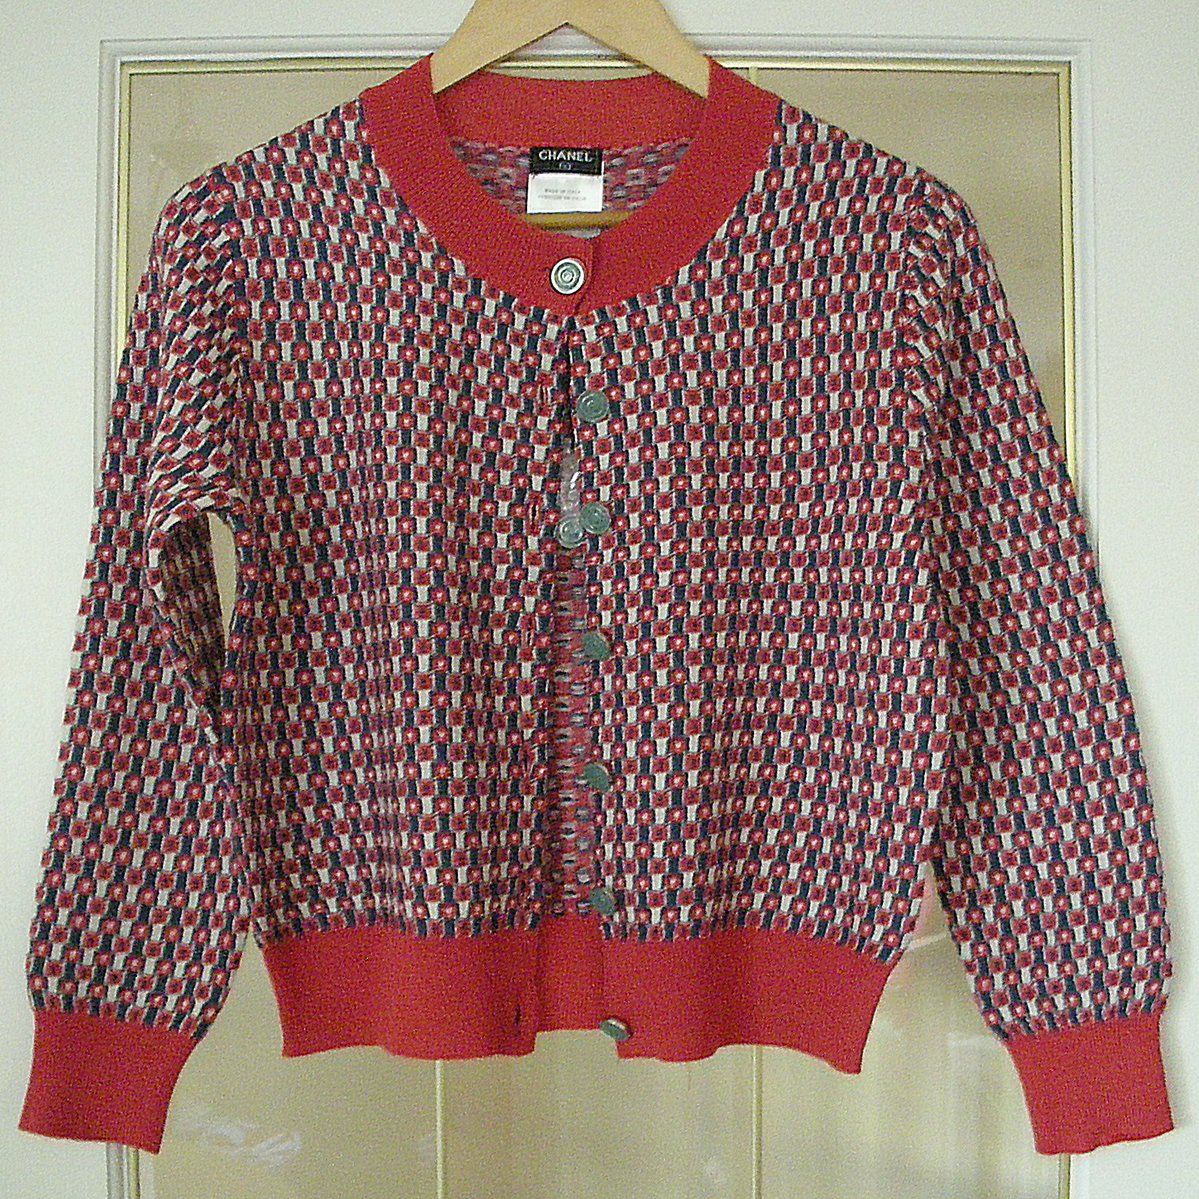 CHANEL Sweater Knitwear Cardigan RED/BLUE Checker Cotton Blend Size 38 ...